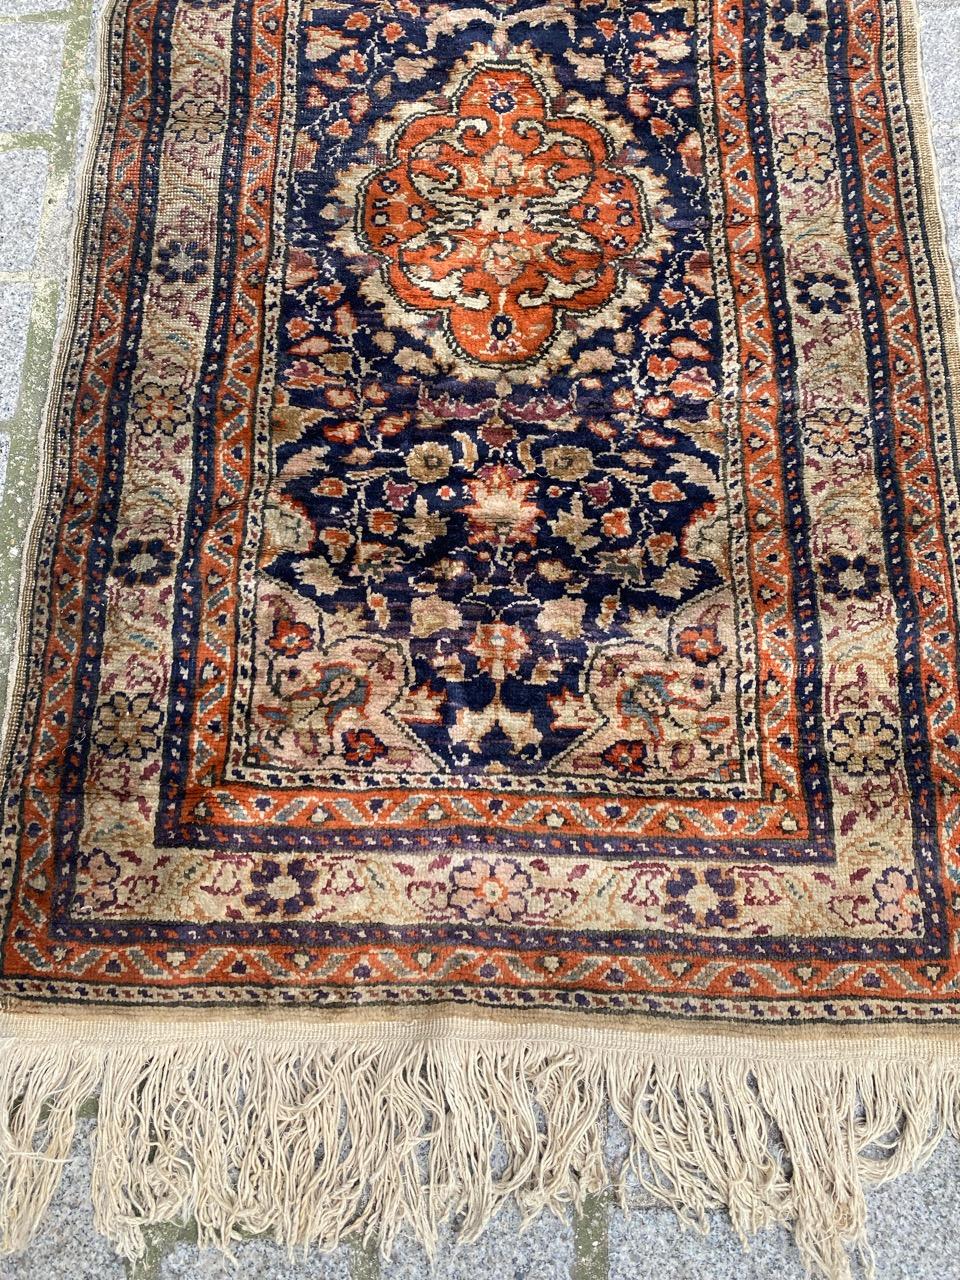 Nice mid century Turkish Kayseri rug with beautiful floral design and nice colors, entirely hand knotted with silk velvet on cotton foundation.

✨✨✨
